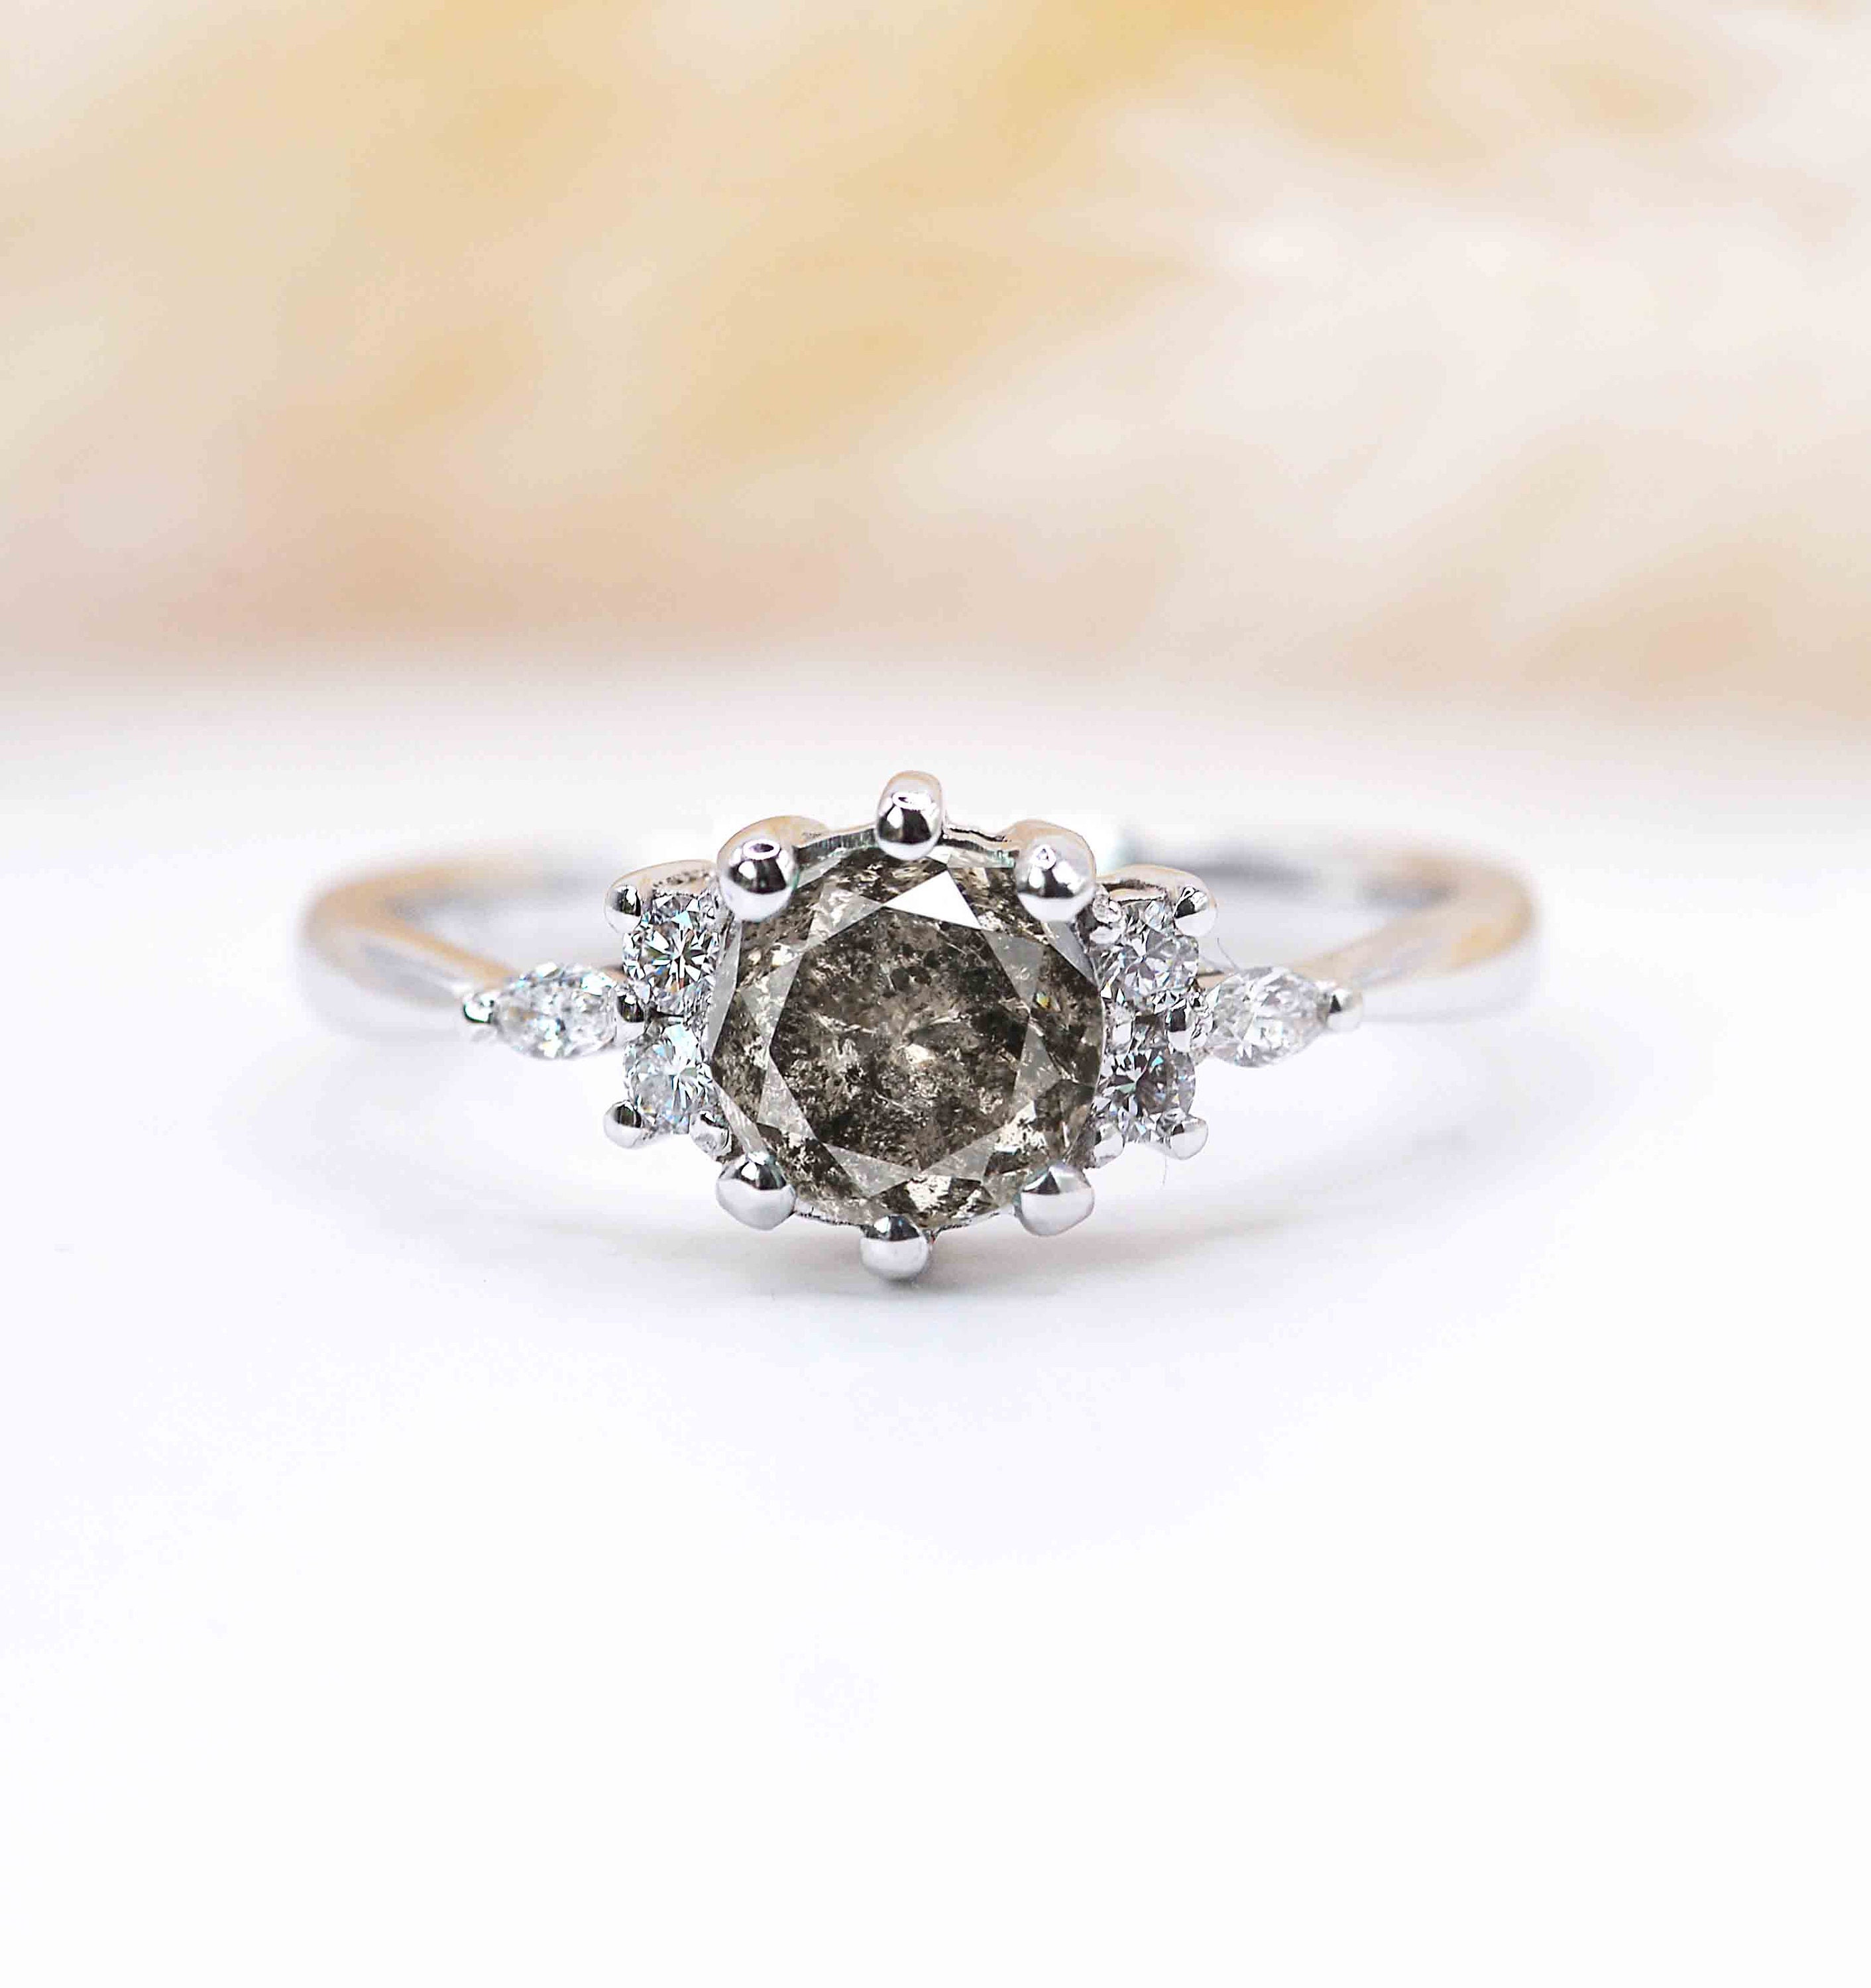 Natural Salt & Pepper Diamond Delicate Ring | Grey Featuring Dainty Solid White Gold Celebrity Vintage Stylish